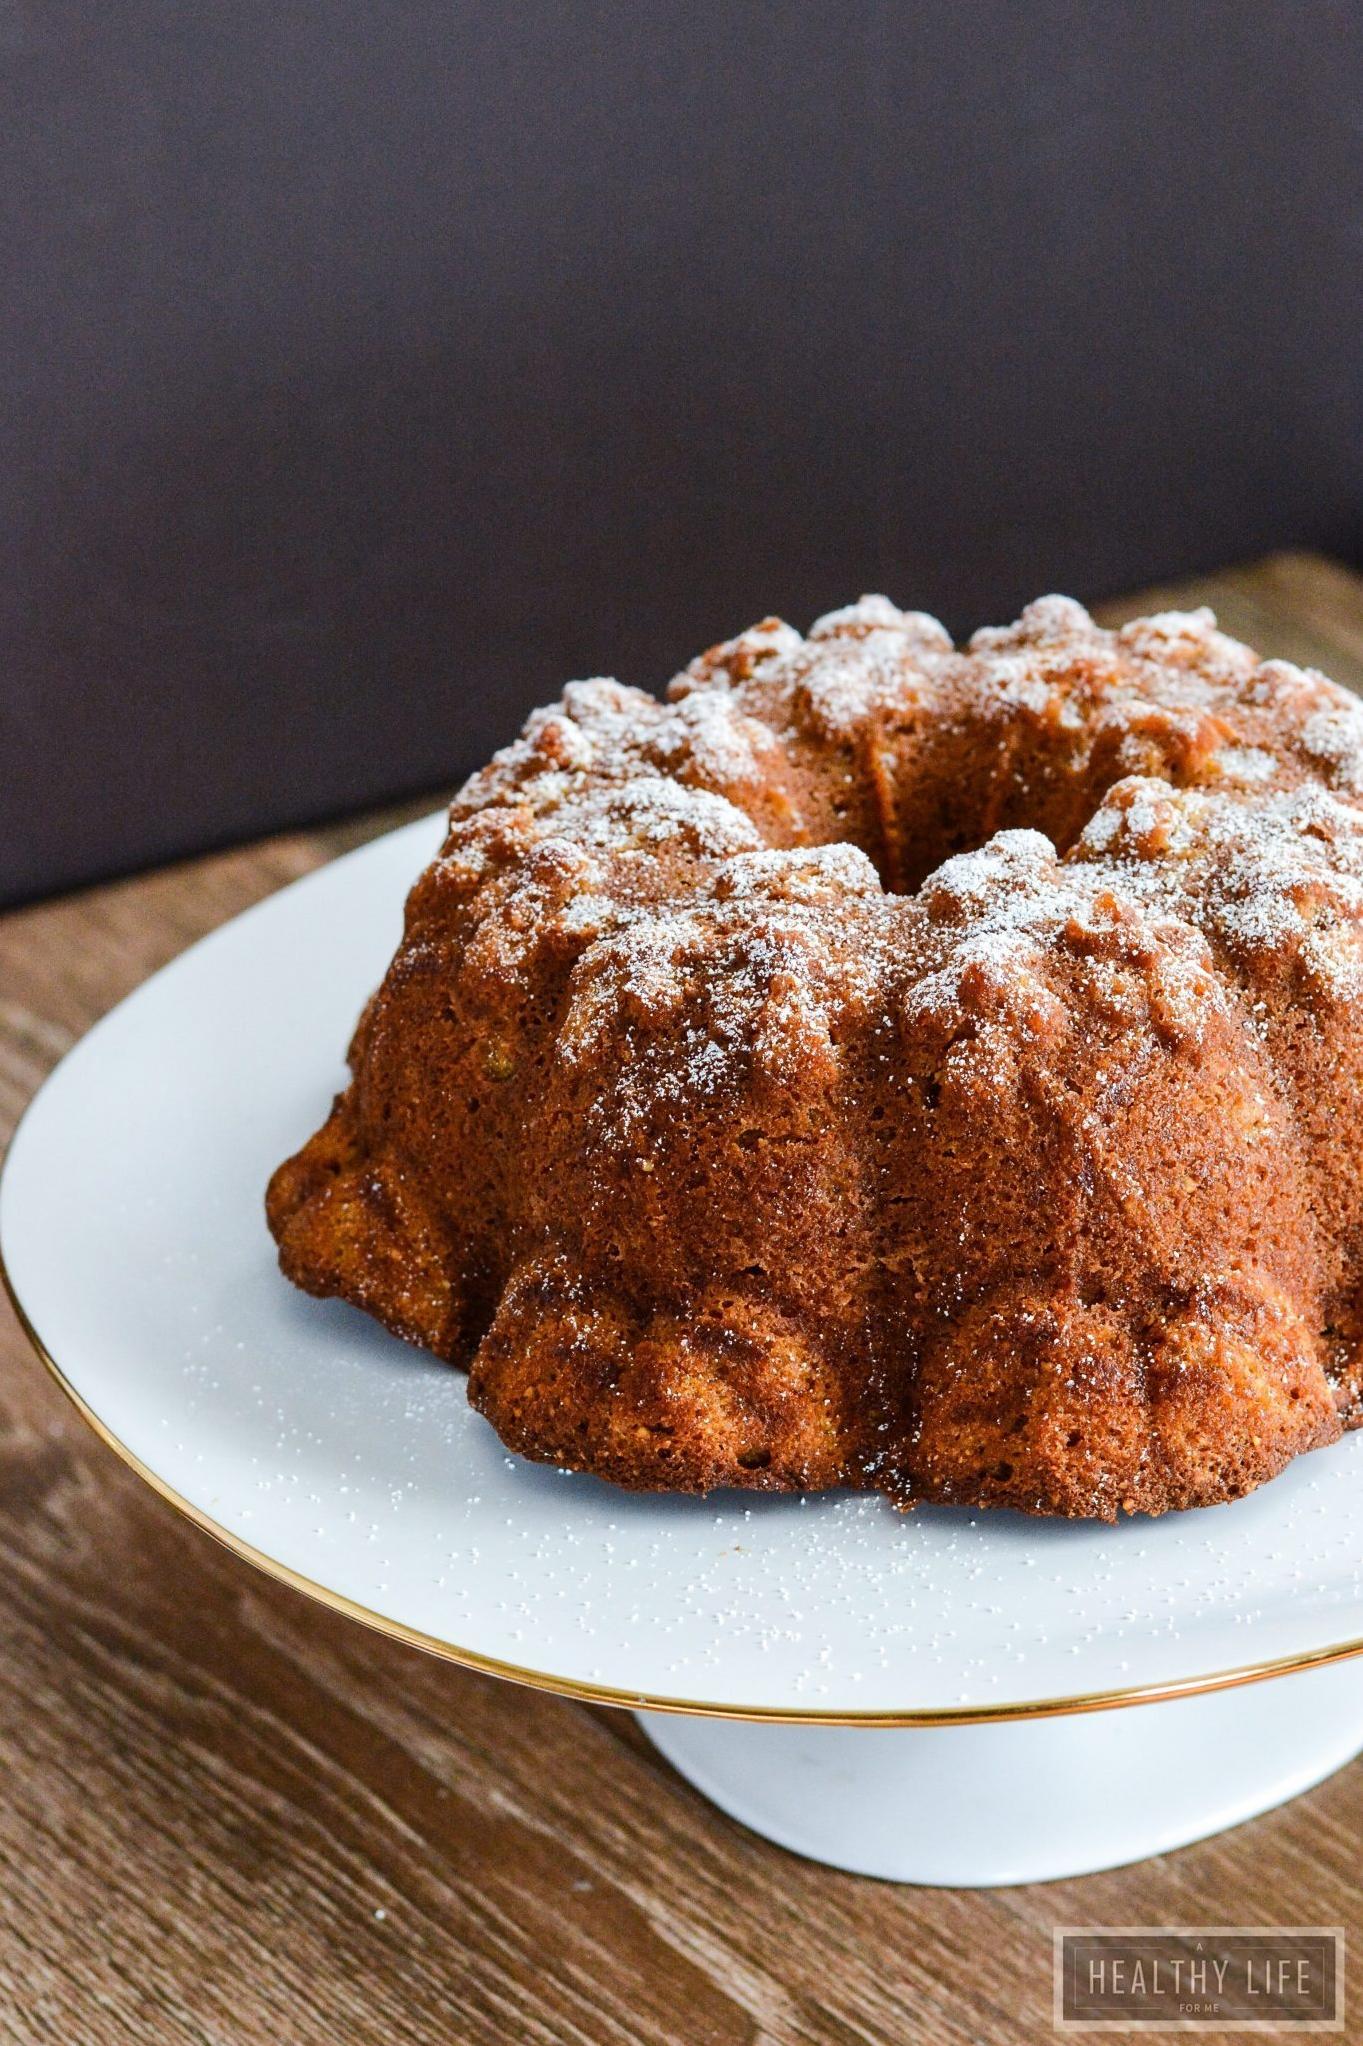  Your kitchen will smell amazing while baking this delicious cake